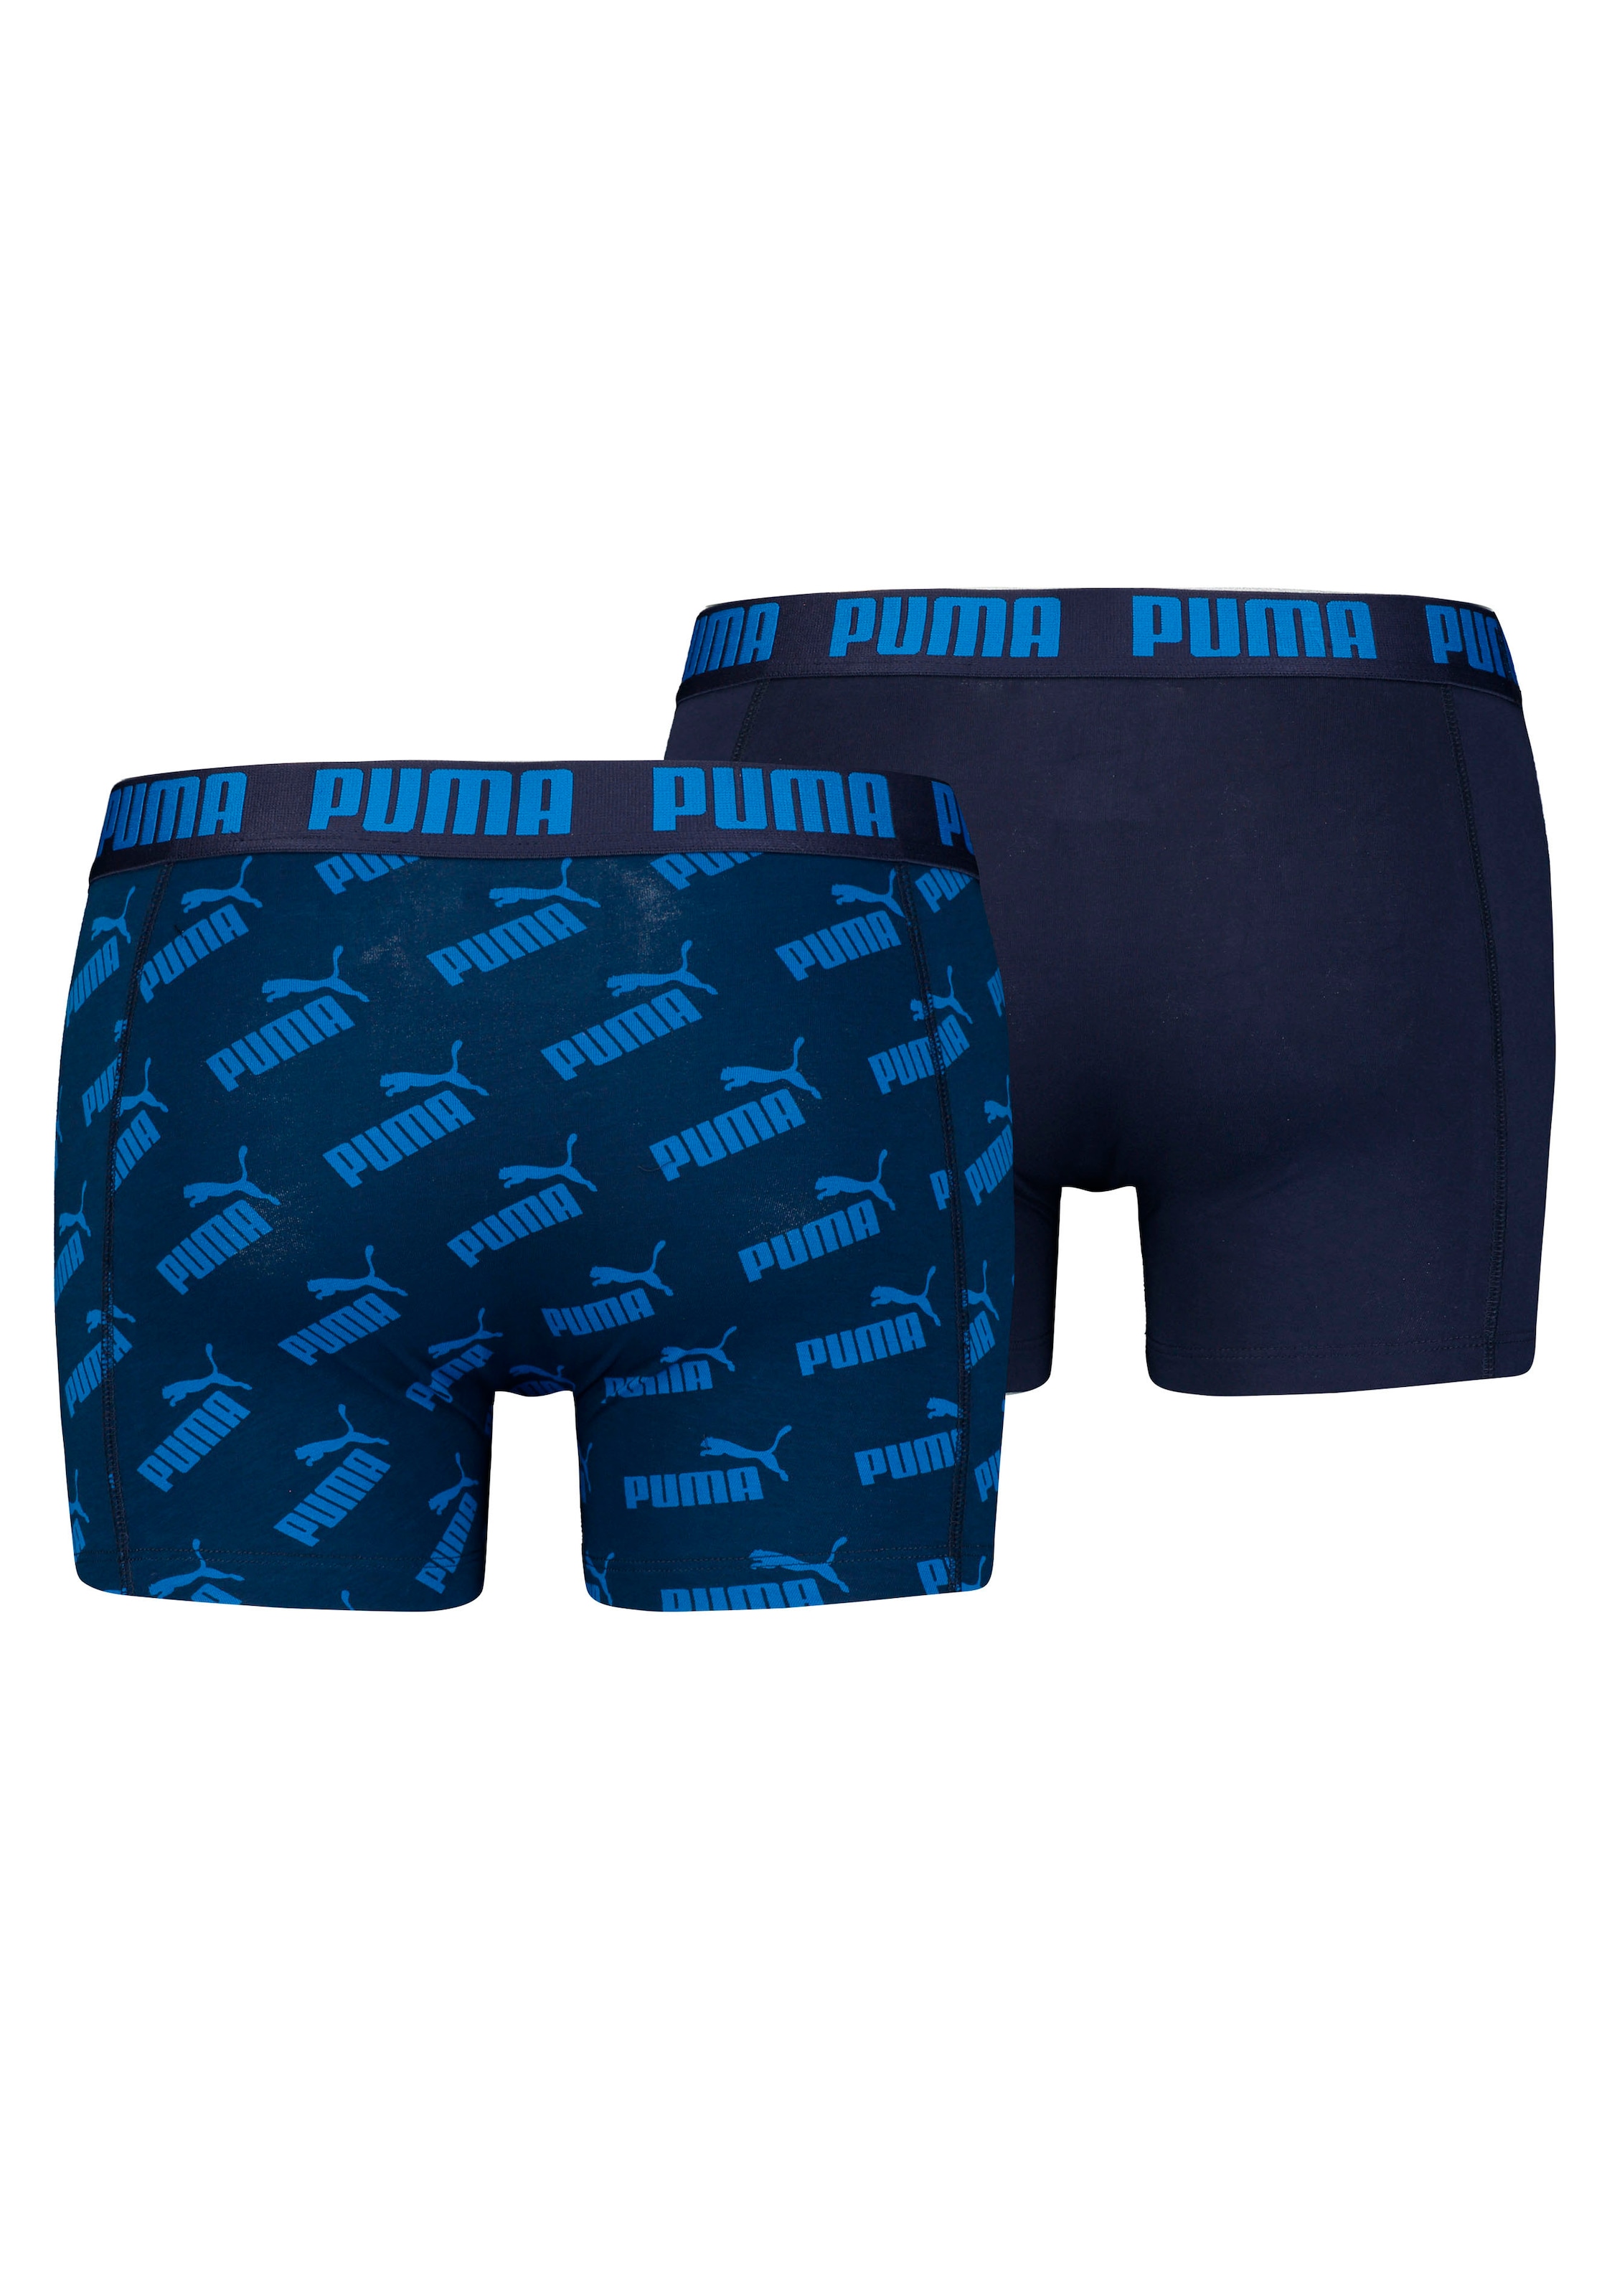 PUMA Boxer, (Packung, 2 St.), EVERYDAY